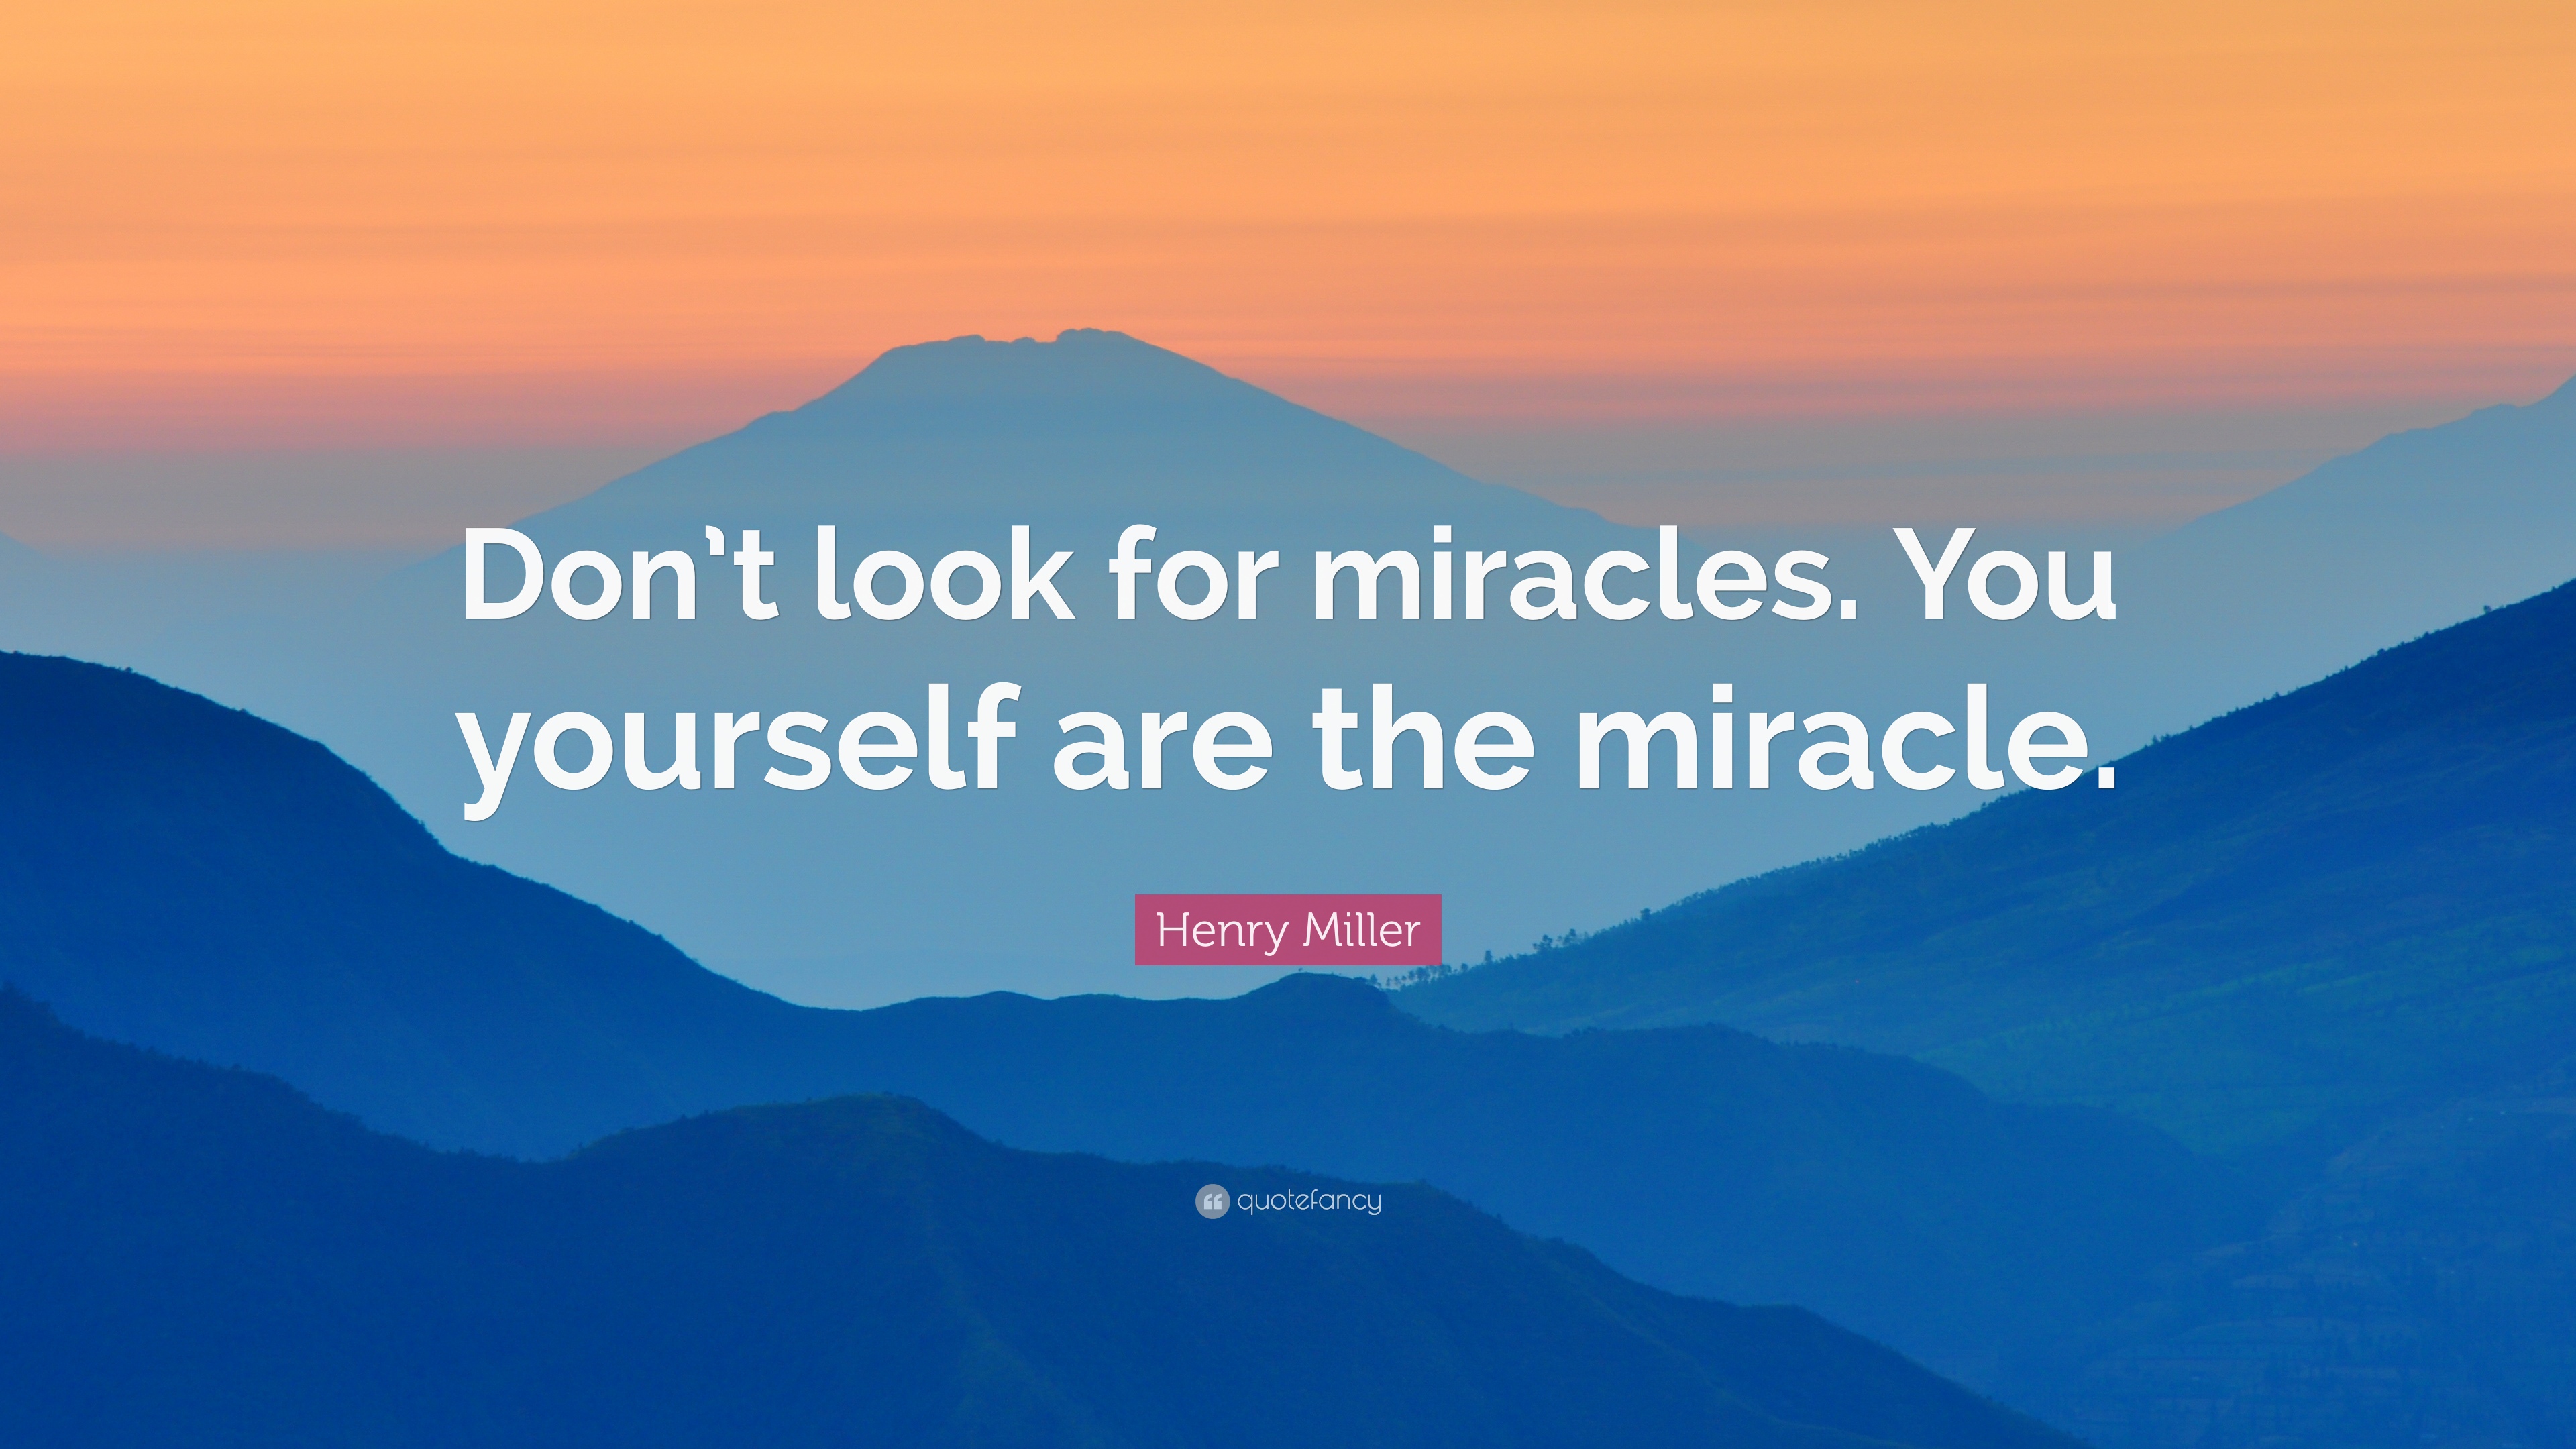 Henry Miller Quote: “Don't look for miracles. You yourself are the ...